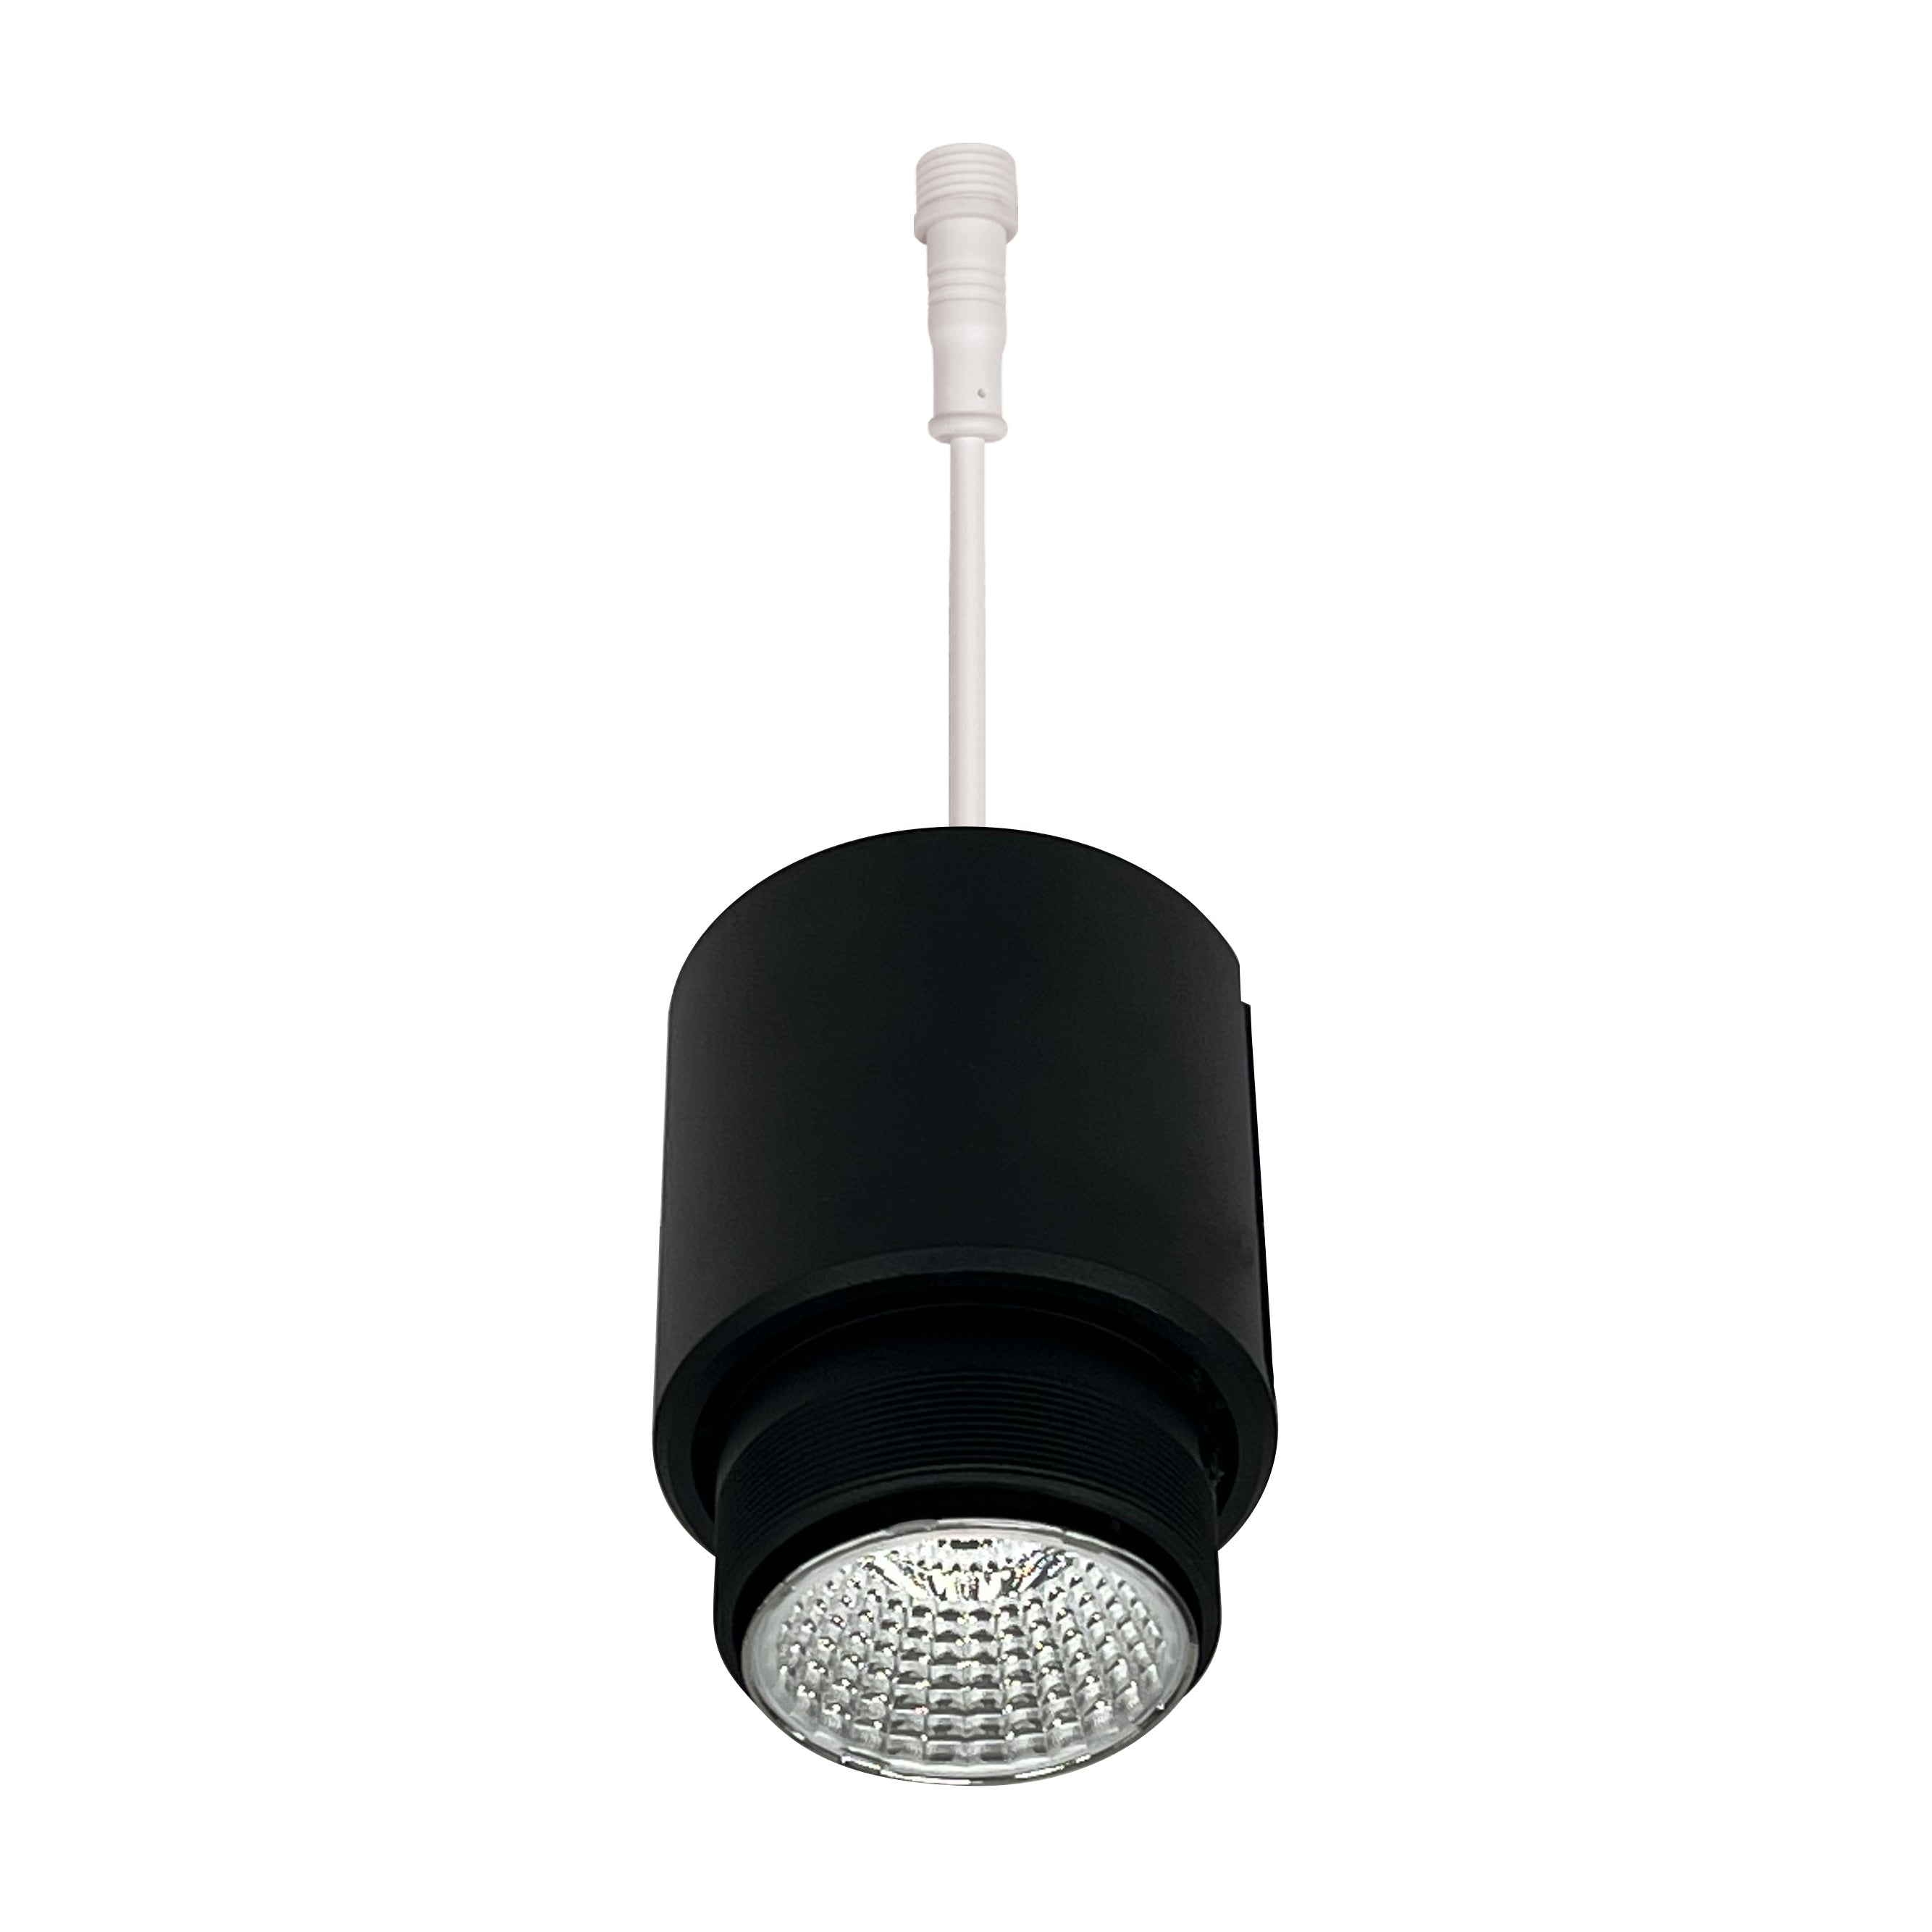 Nora Lighting NIOC-24LED930X - Recessed - 2 Inch & 4 Inch Iolite Can-less LED Module, 3000K